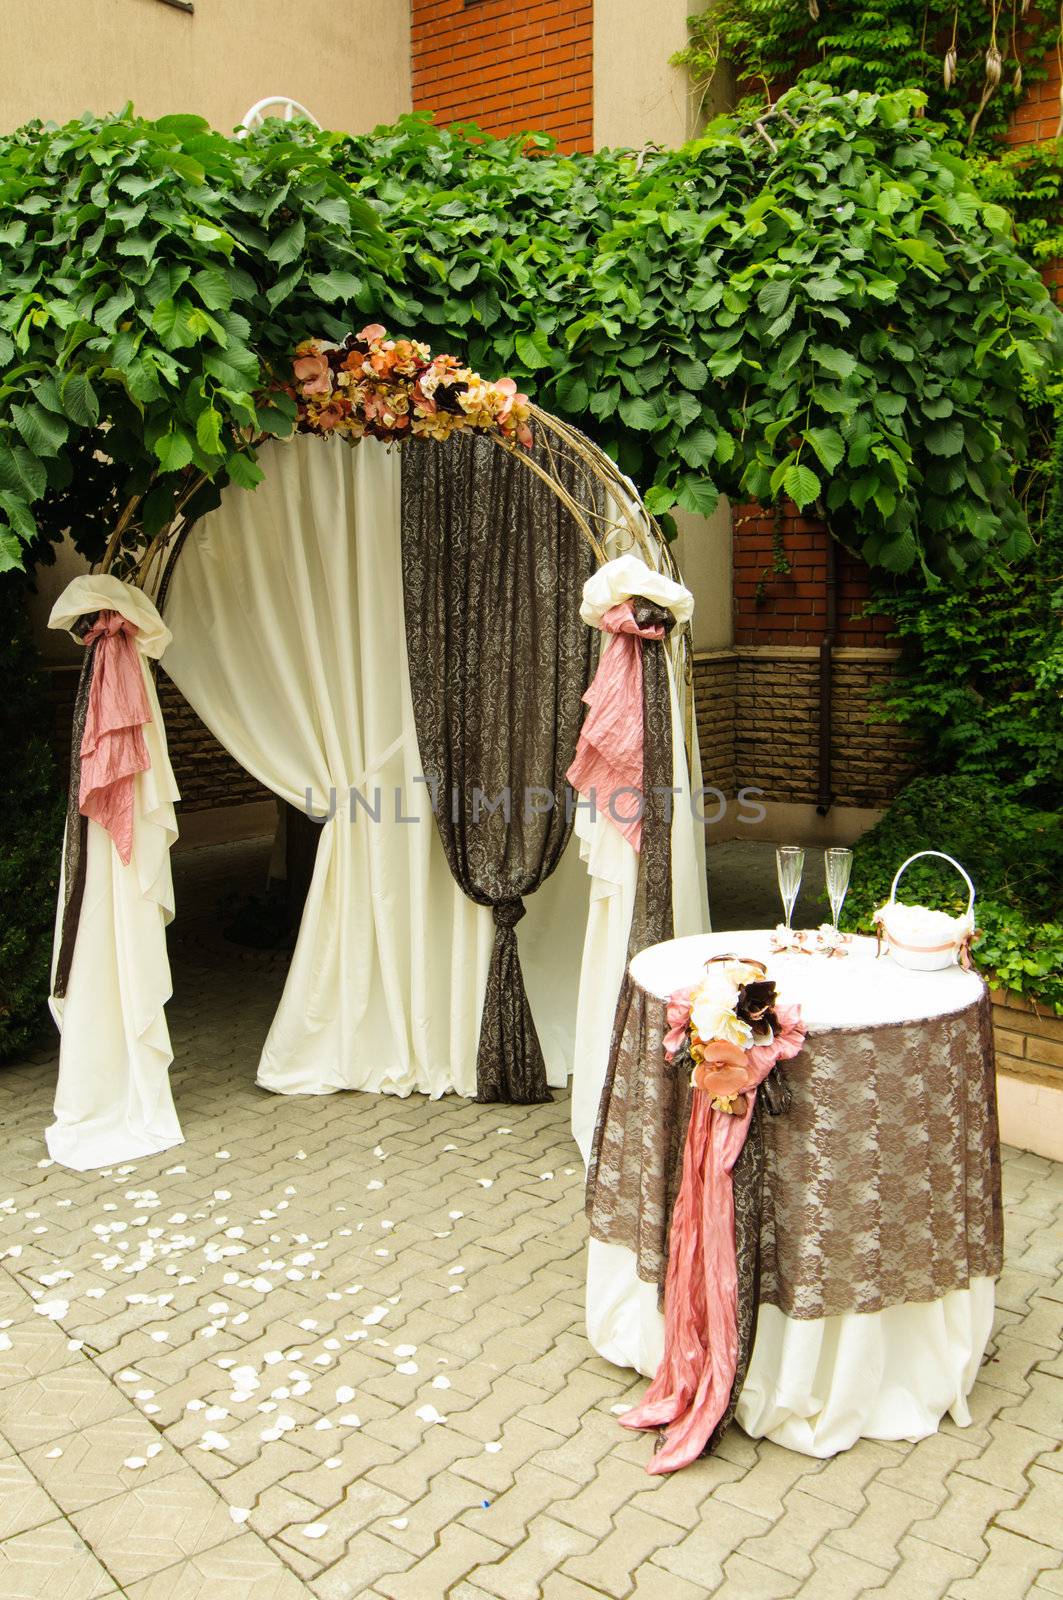 Outdoor wedding arch with table under grapevine